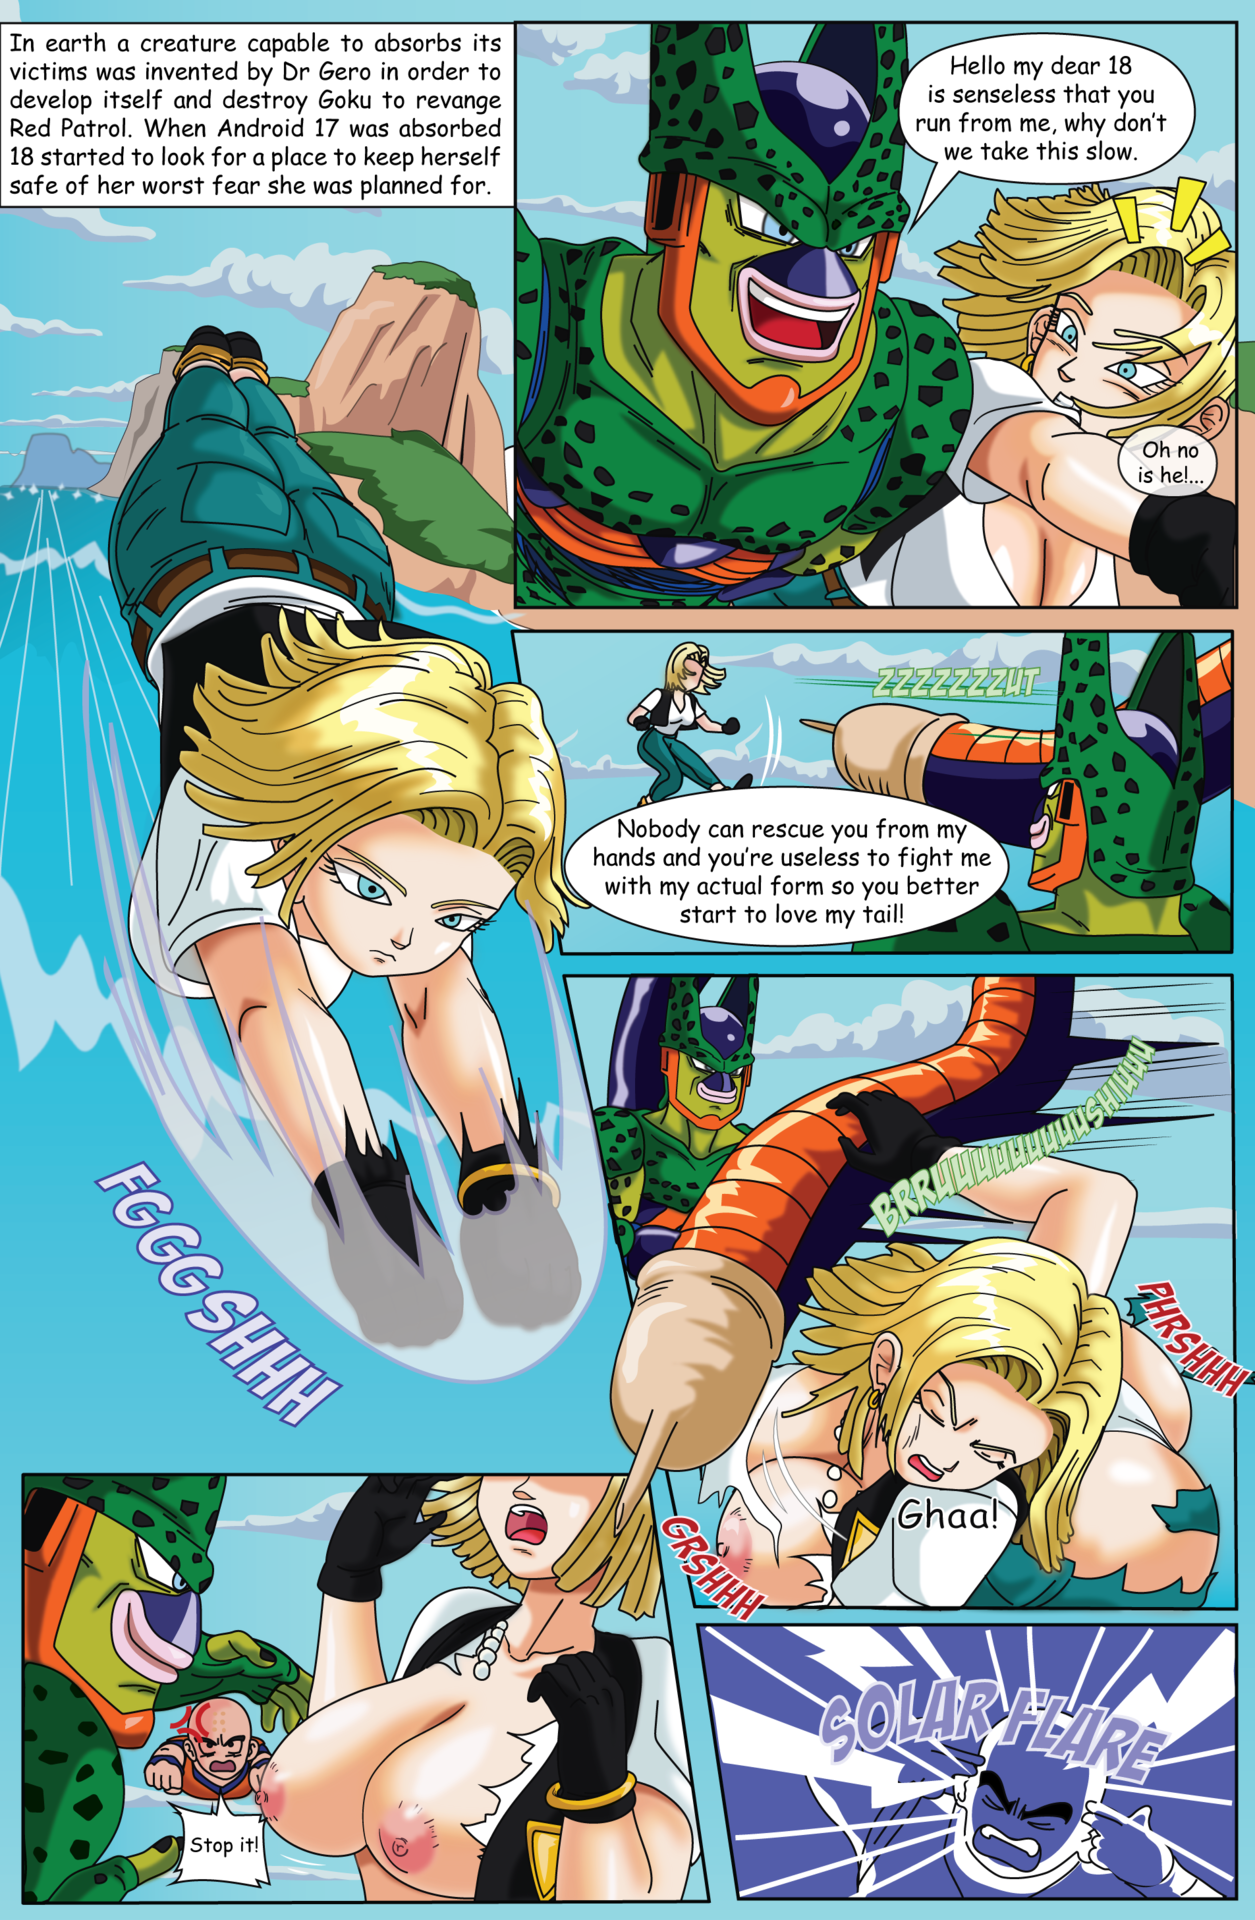 Sugar P. recommendet Porn pics of android 18 getting fucked